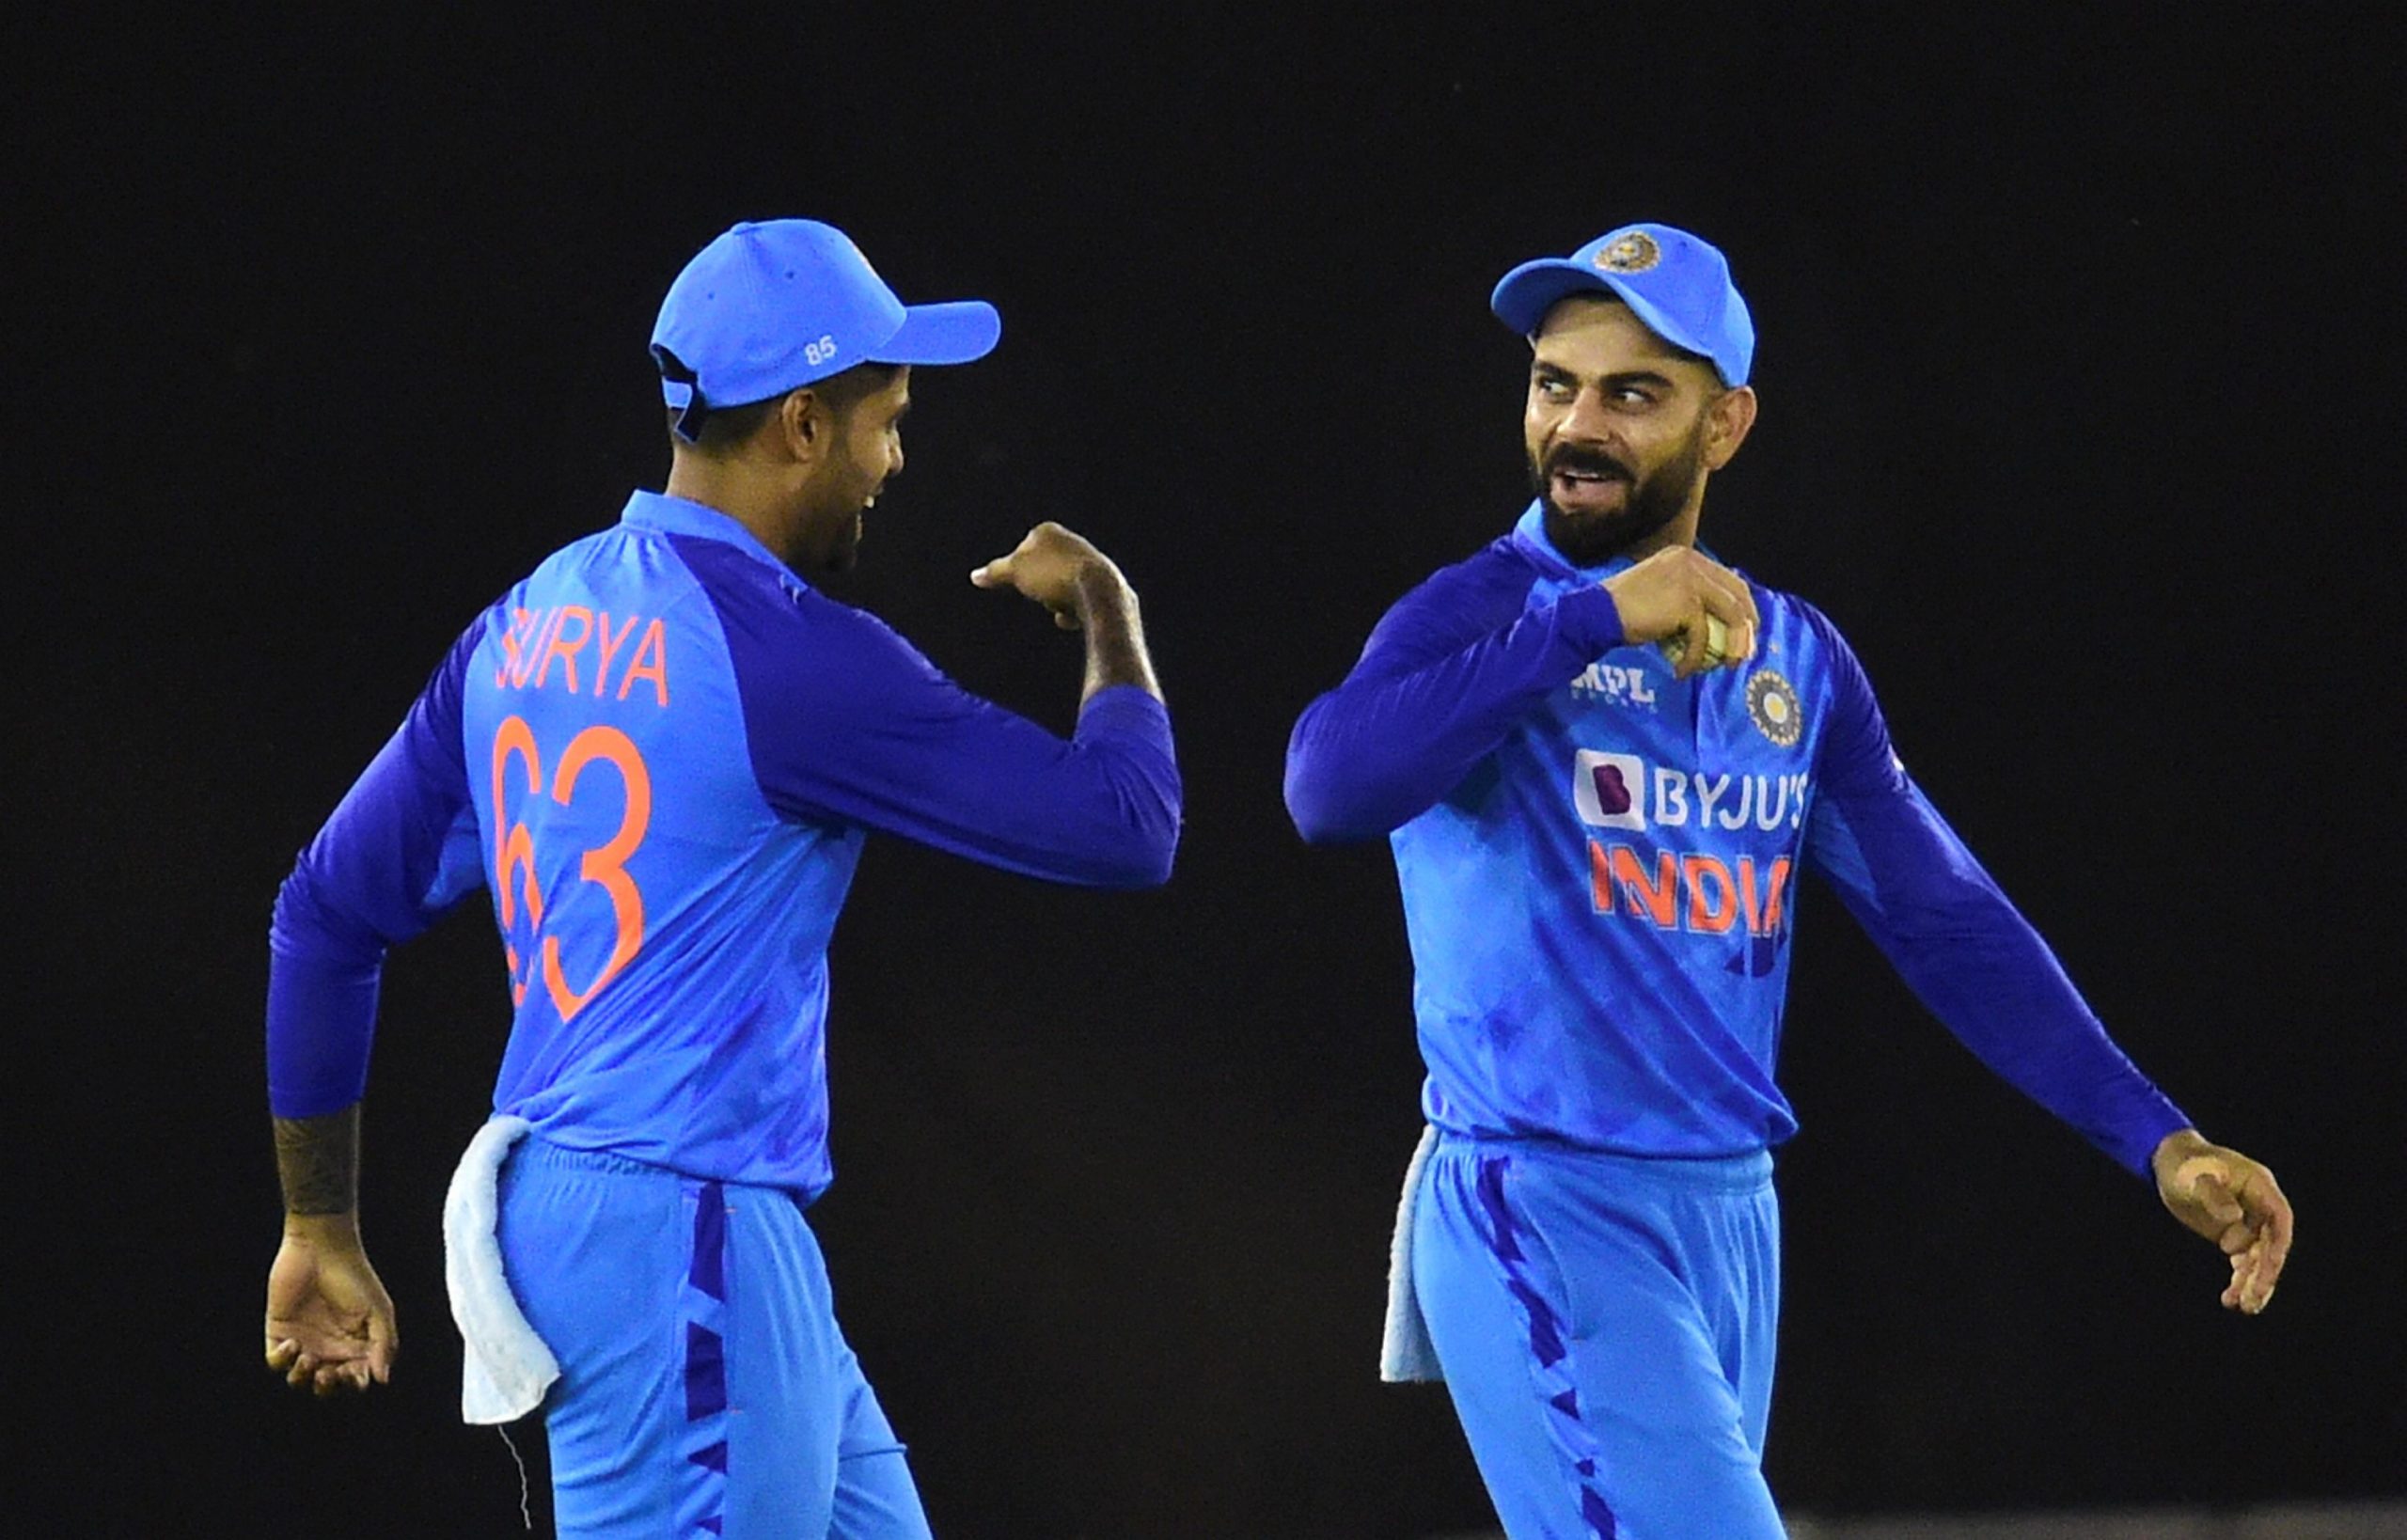 India vs Australia, 2nd T20I 2022: When and where to watch, live streaming